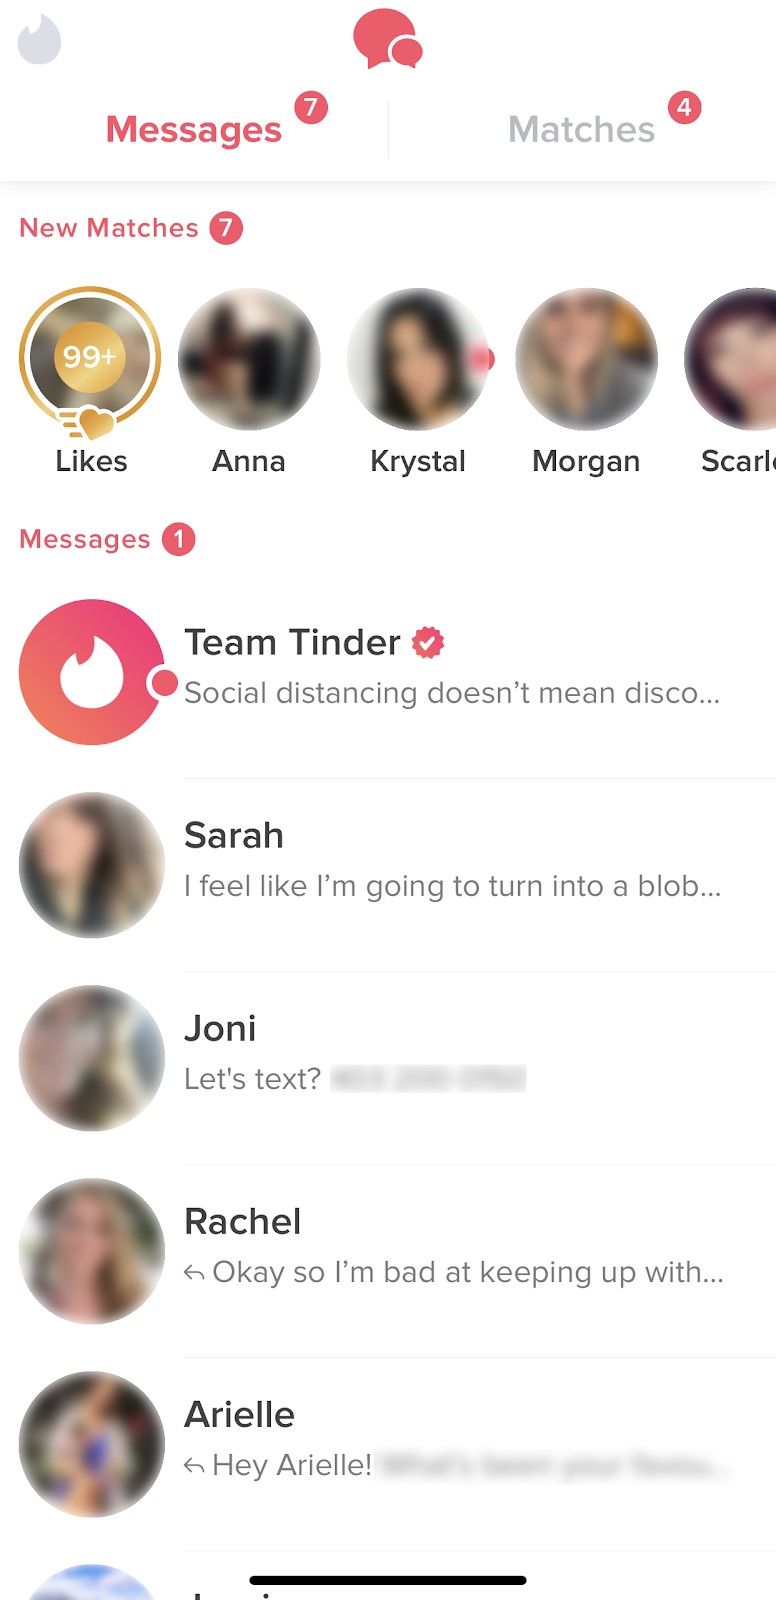 Some of the messages you see using Tinder